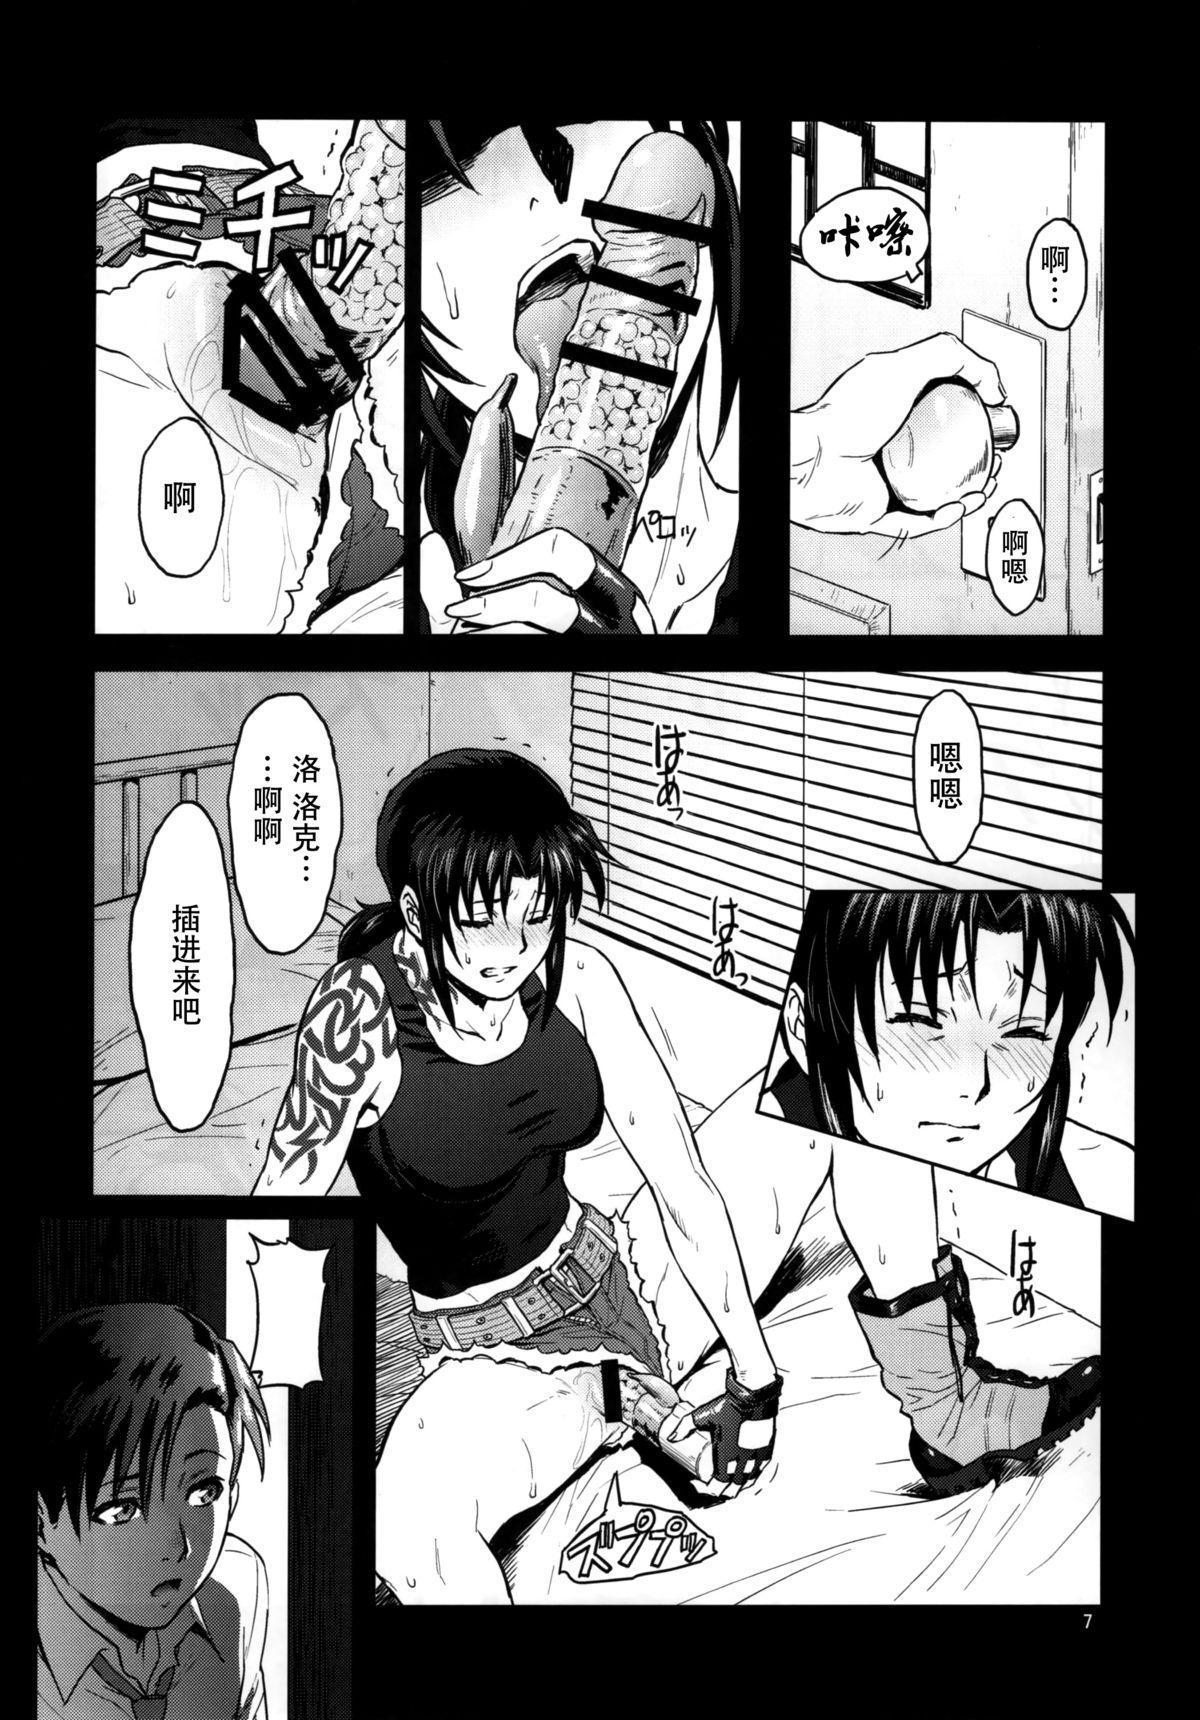 Fat Sick from drinking - Black lagoon Legs - Page 8